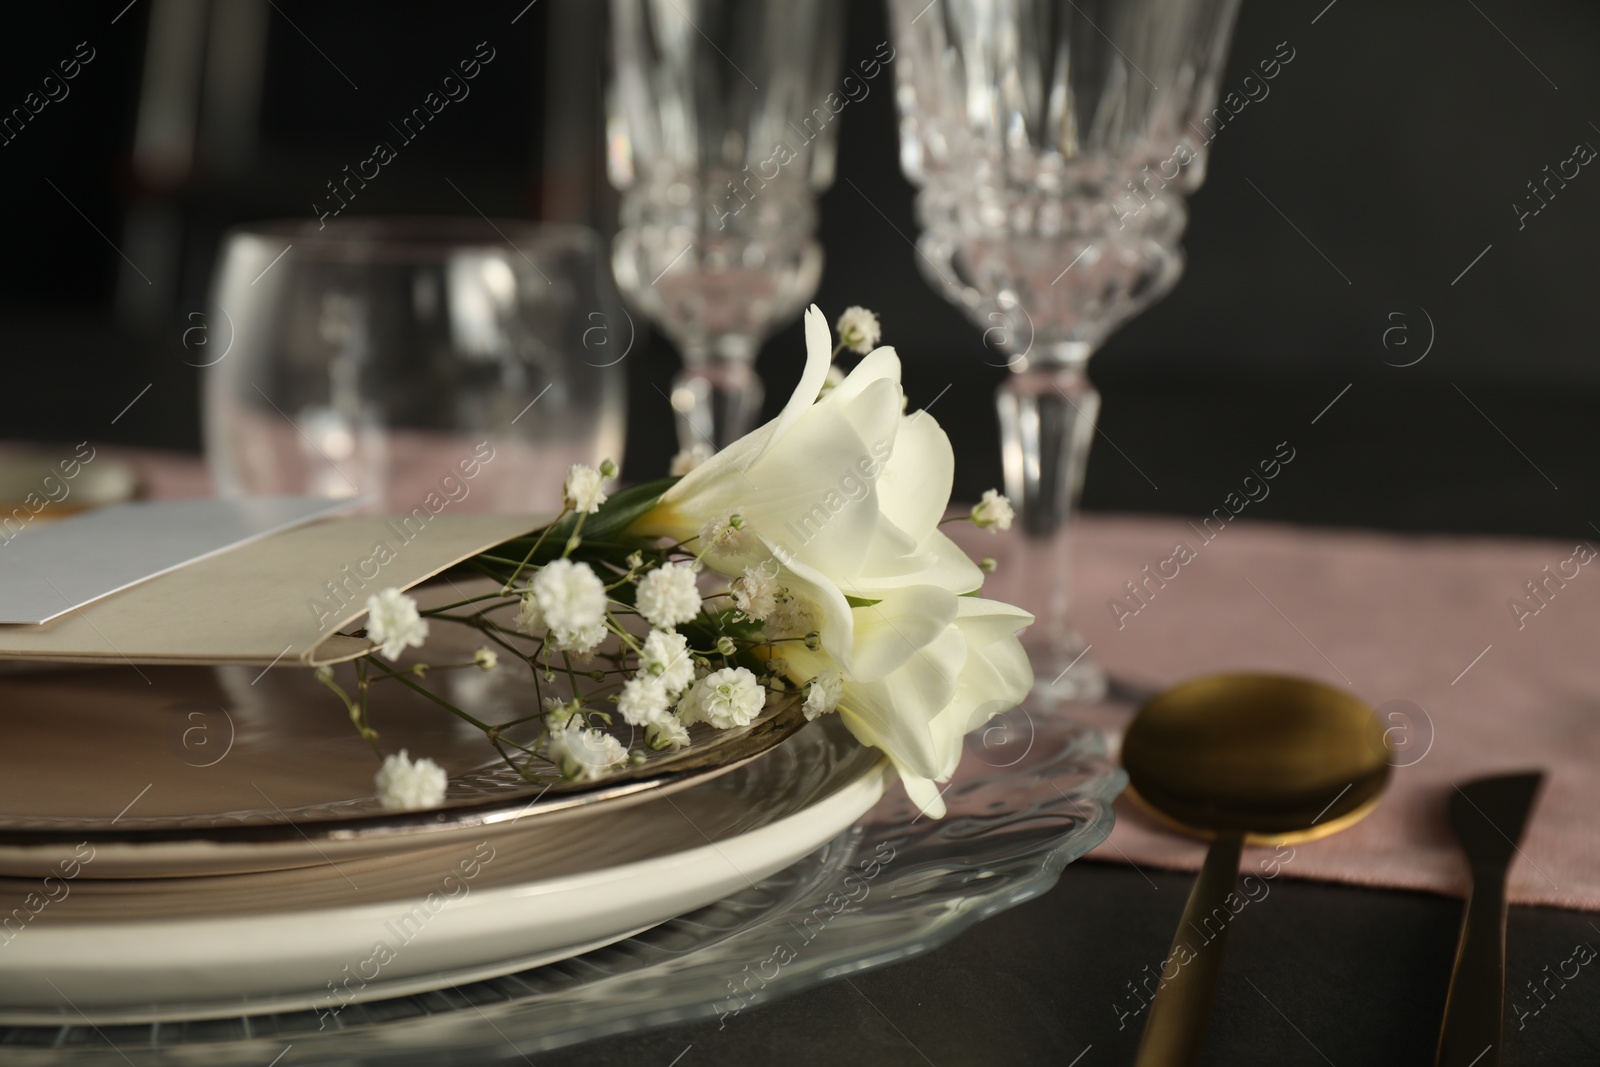 Photo of Stylish table setting. Plates, cutlery and floral decor on black surface, closeup with space for text